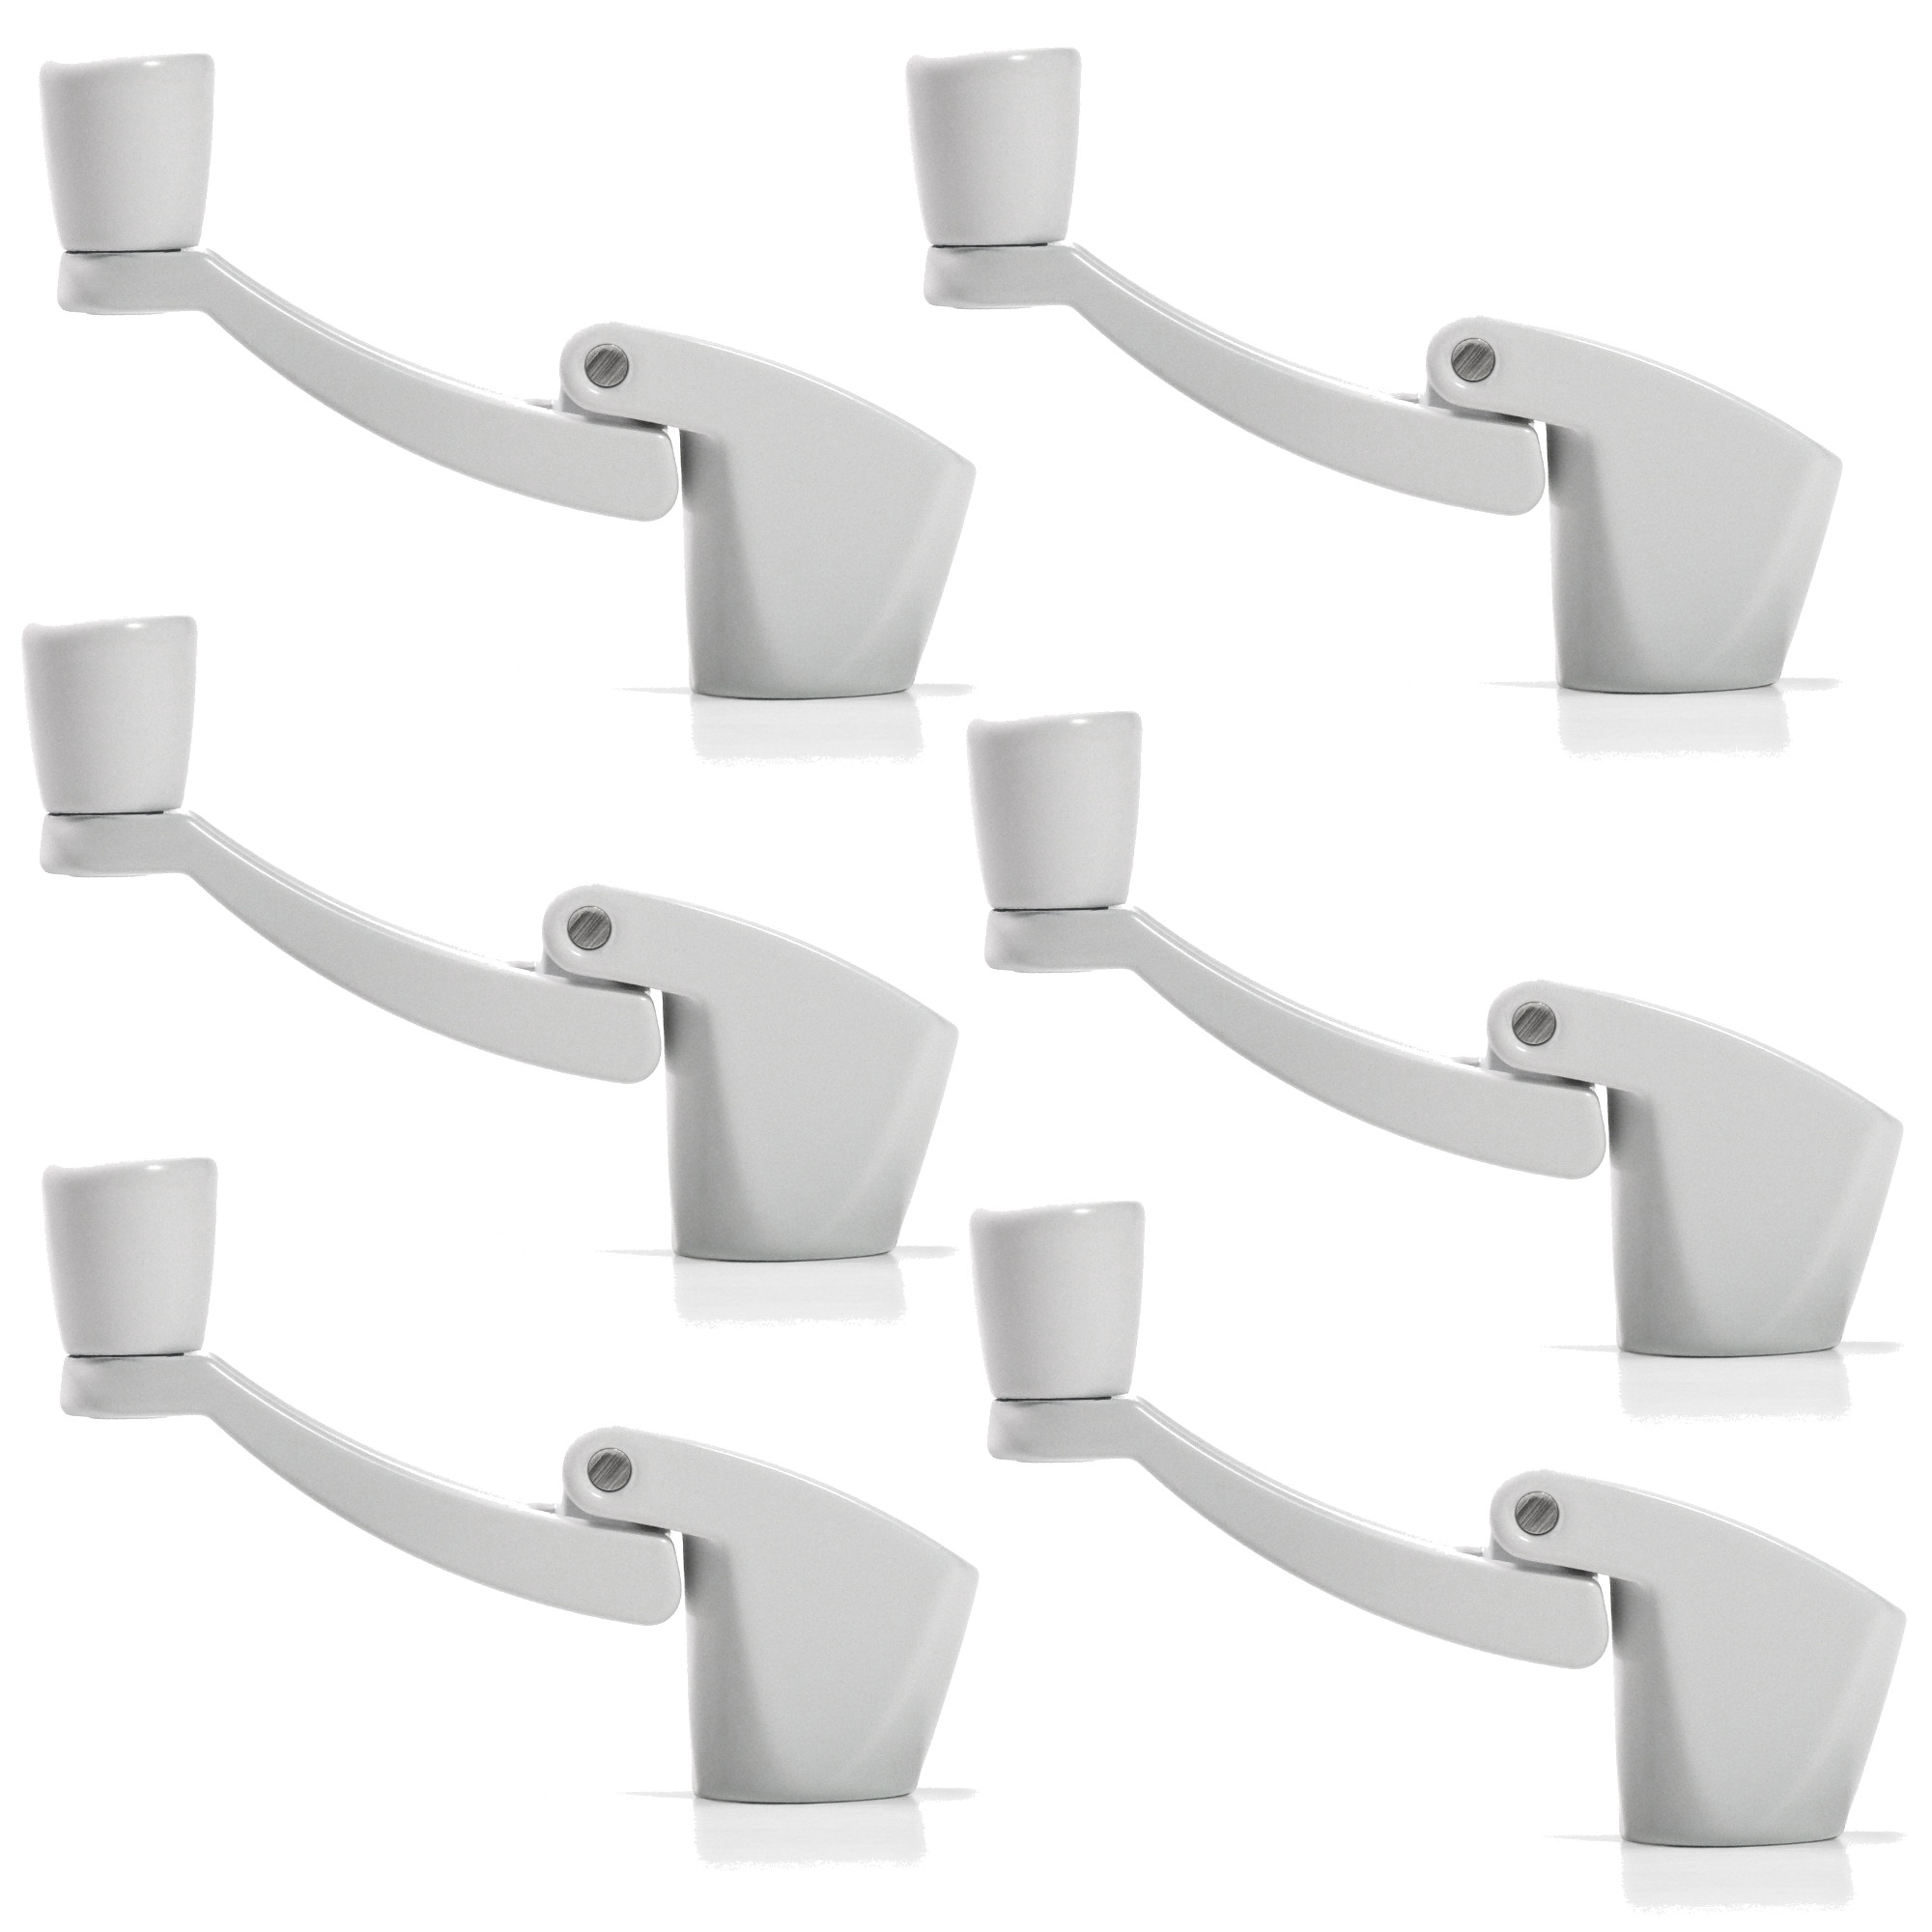 Ideal Security Inc. Fold Away Window Crank Handles Painted White (6-pack)